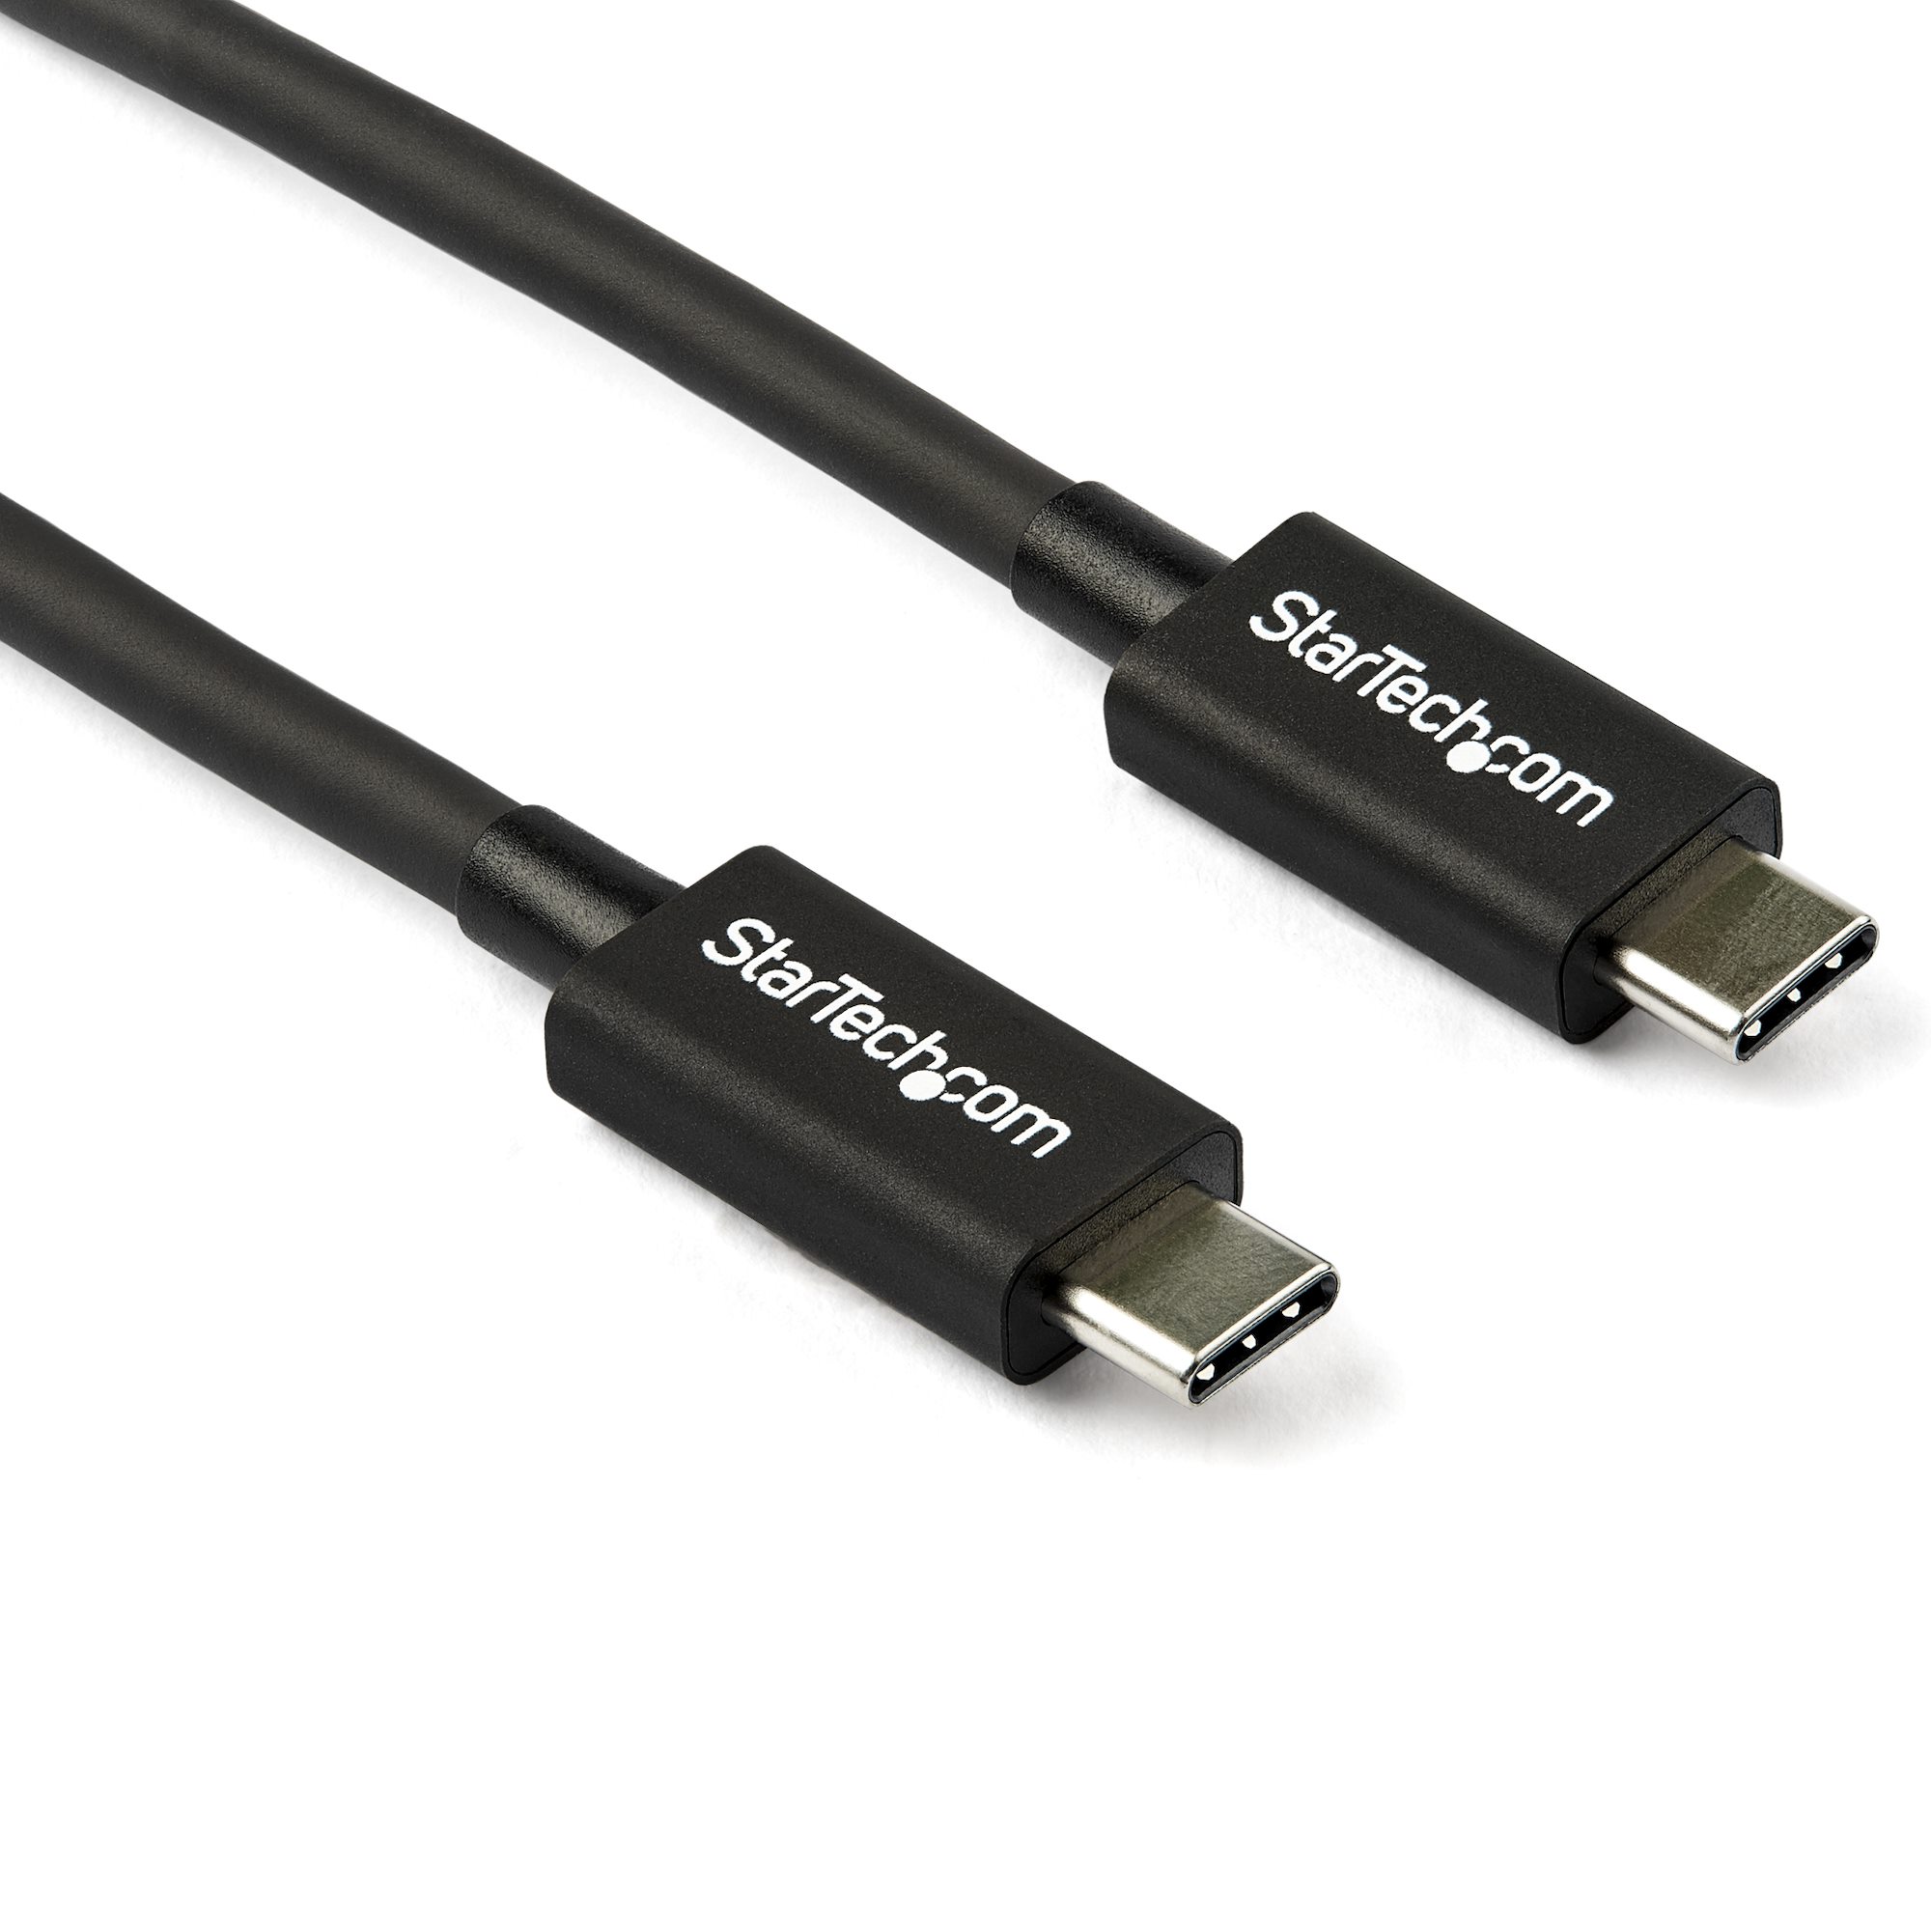 Cable - Thunderbolt 3 - 0.8 - 40Gbps Thunderbolt 3 and Adapters | StarTech.com